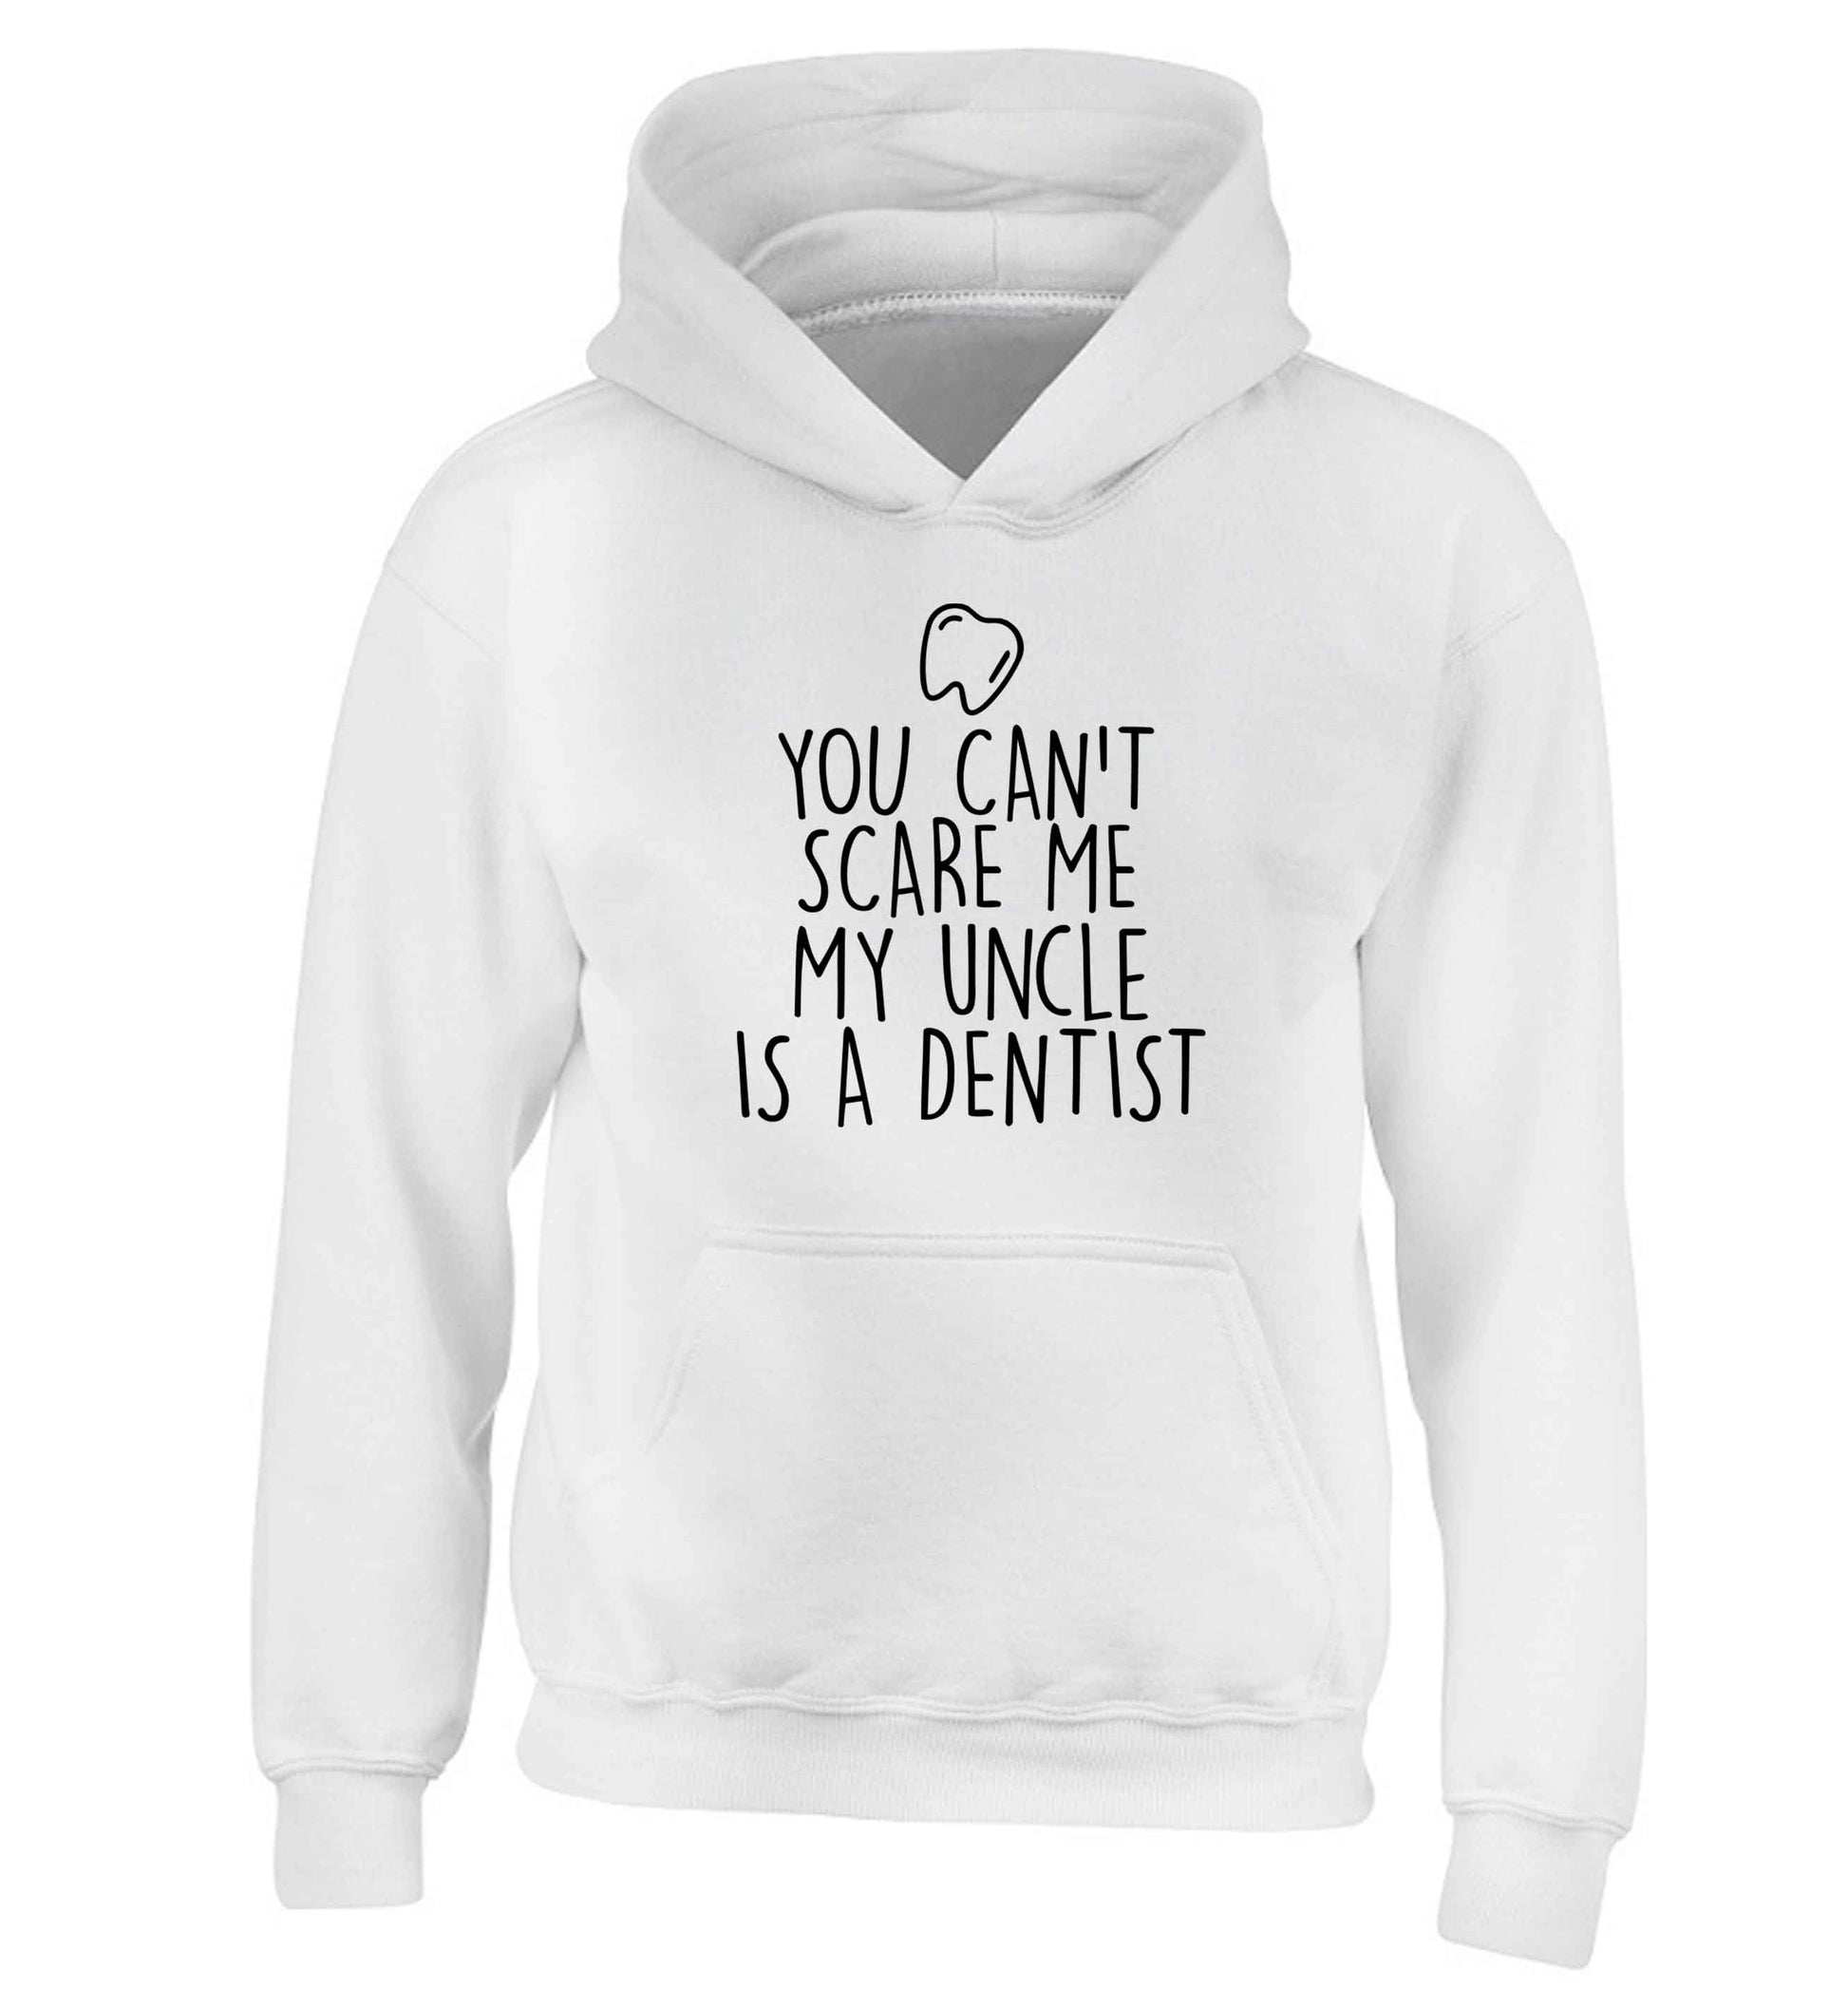 You can't scare me my uncle is a dentist children's white hoodie 12-13 Years